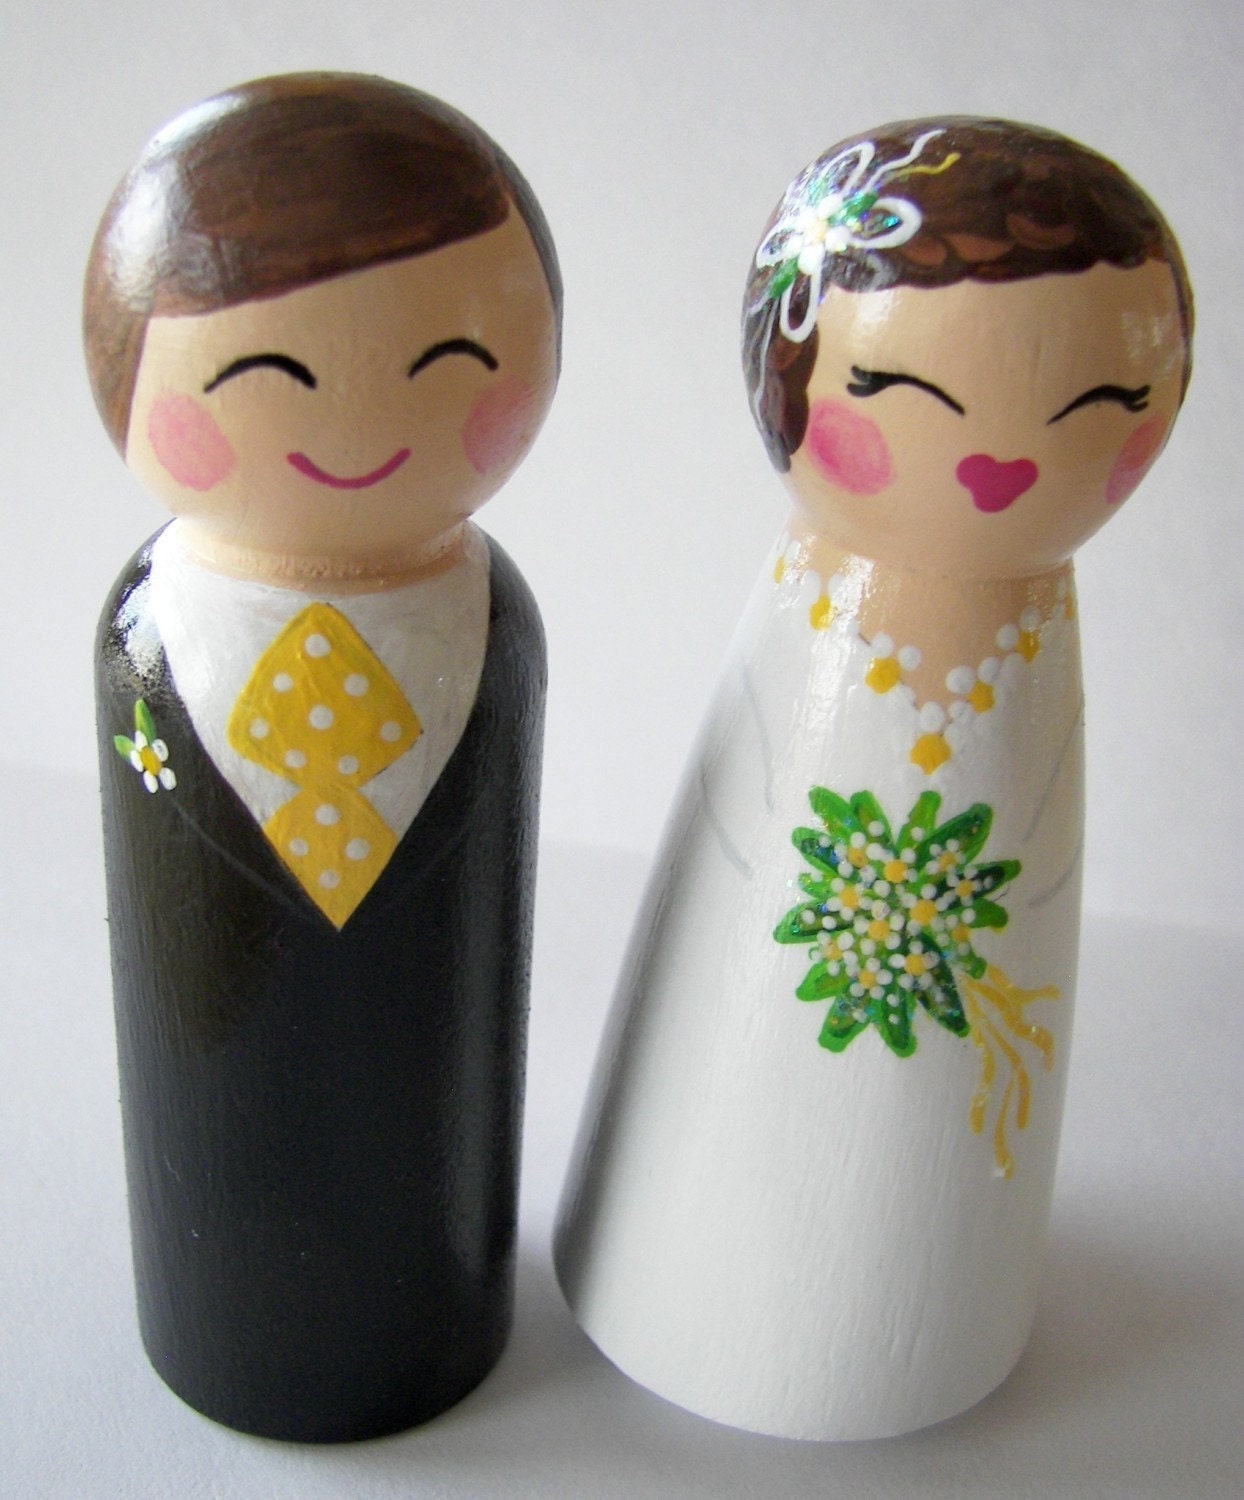 The White Daisy Wedding The Cake Toppers Hand Painted Love Boxes Custom